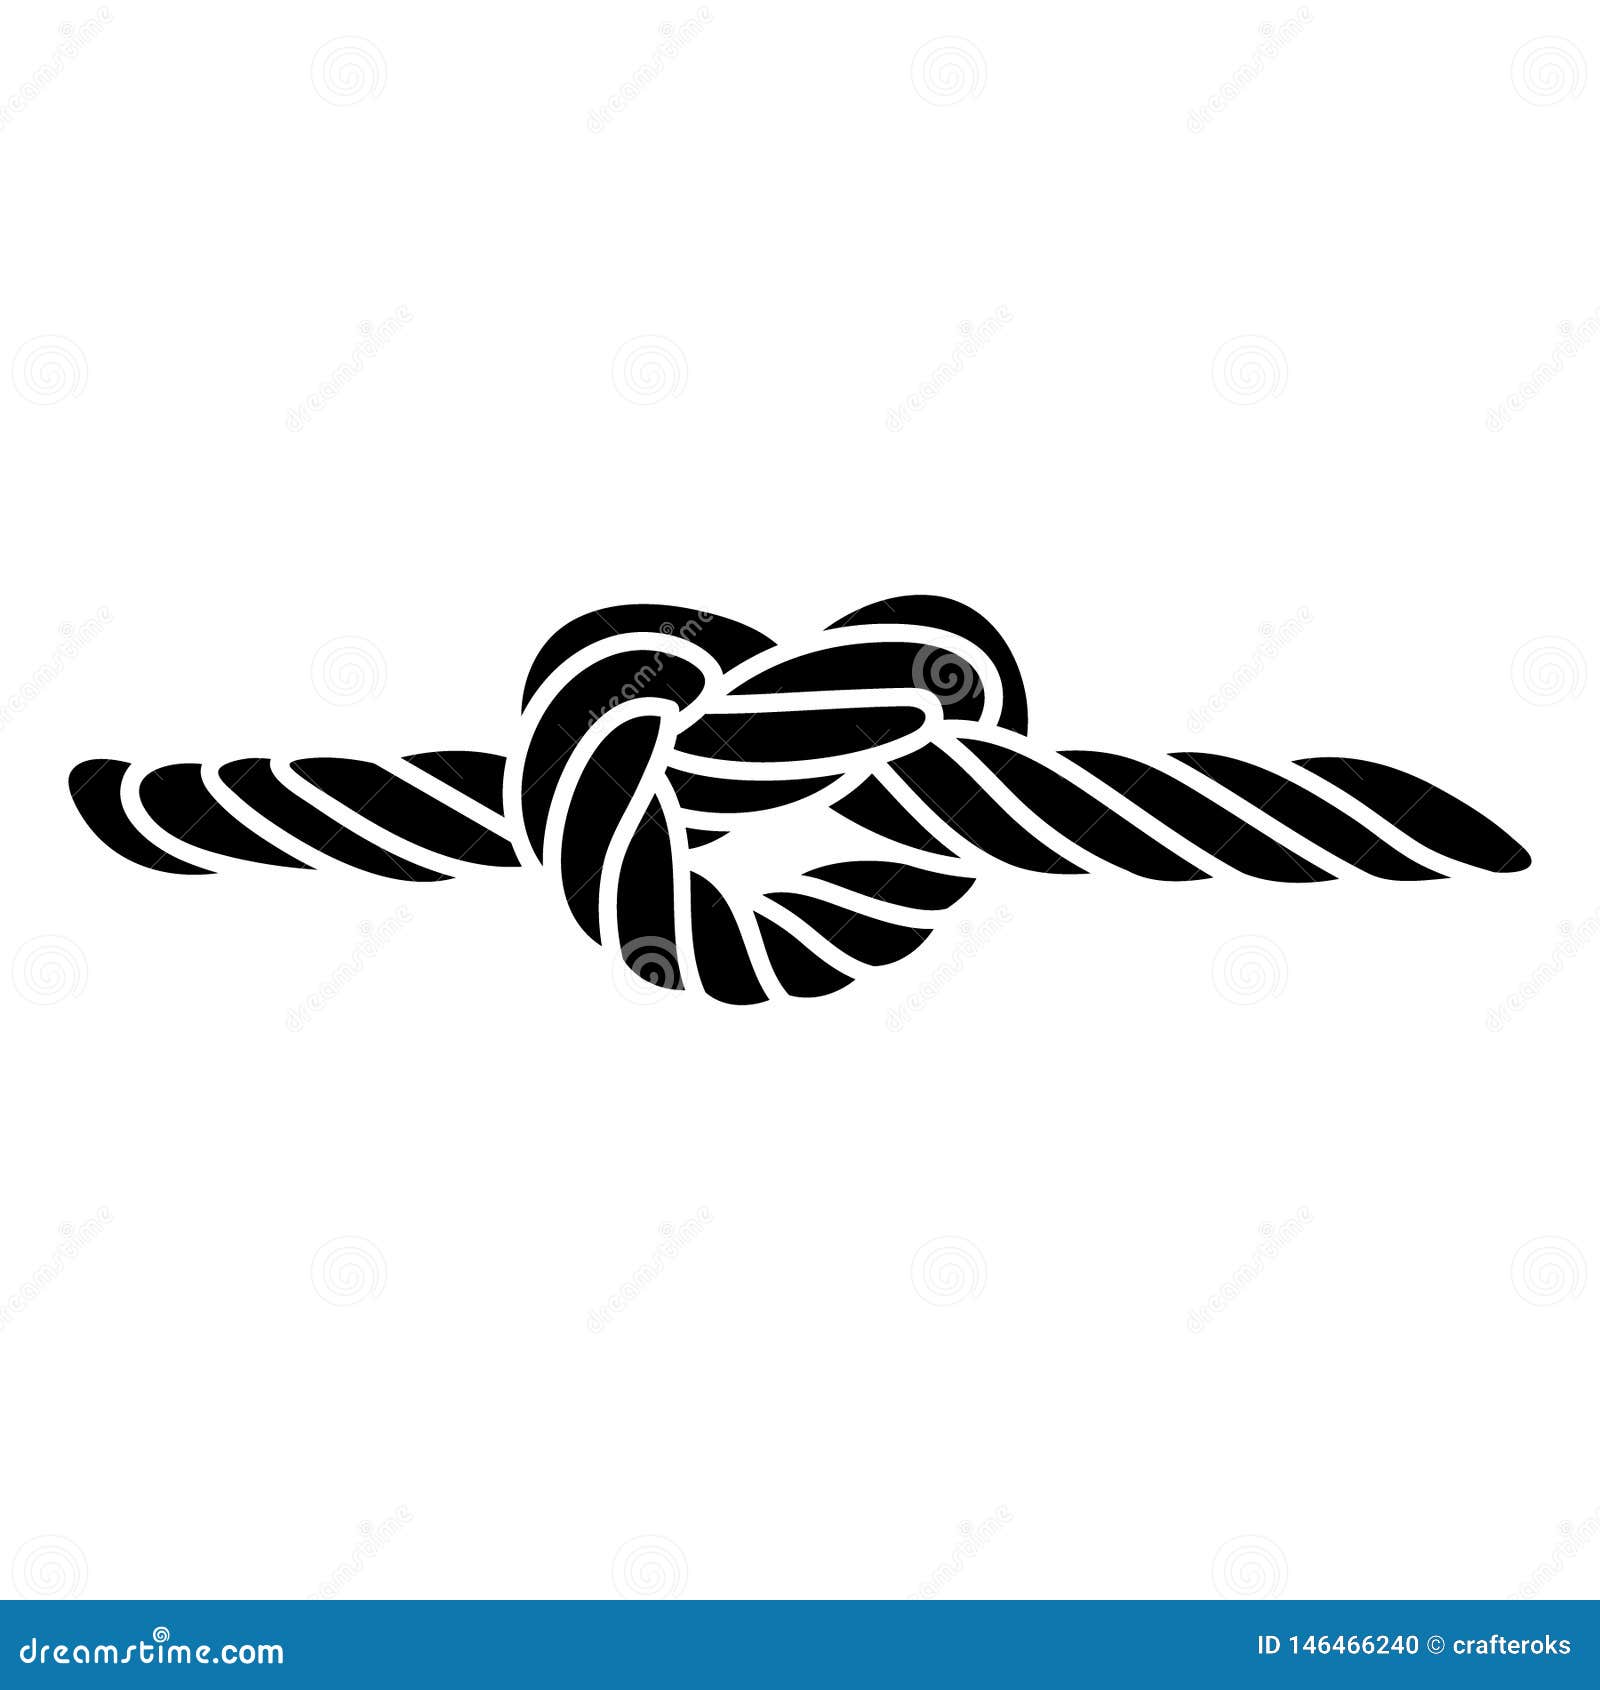 Rope Knot Vector, Hand Drawn, Vector, Eps, Logo, Icon, Crafteroks ...